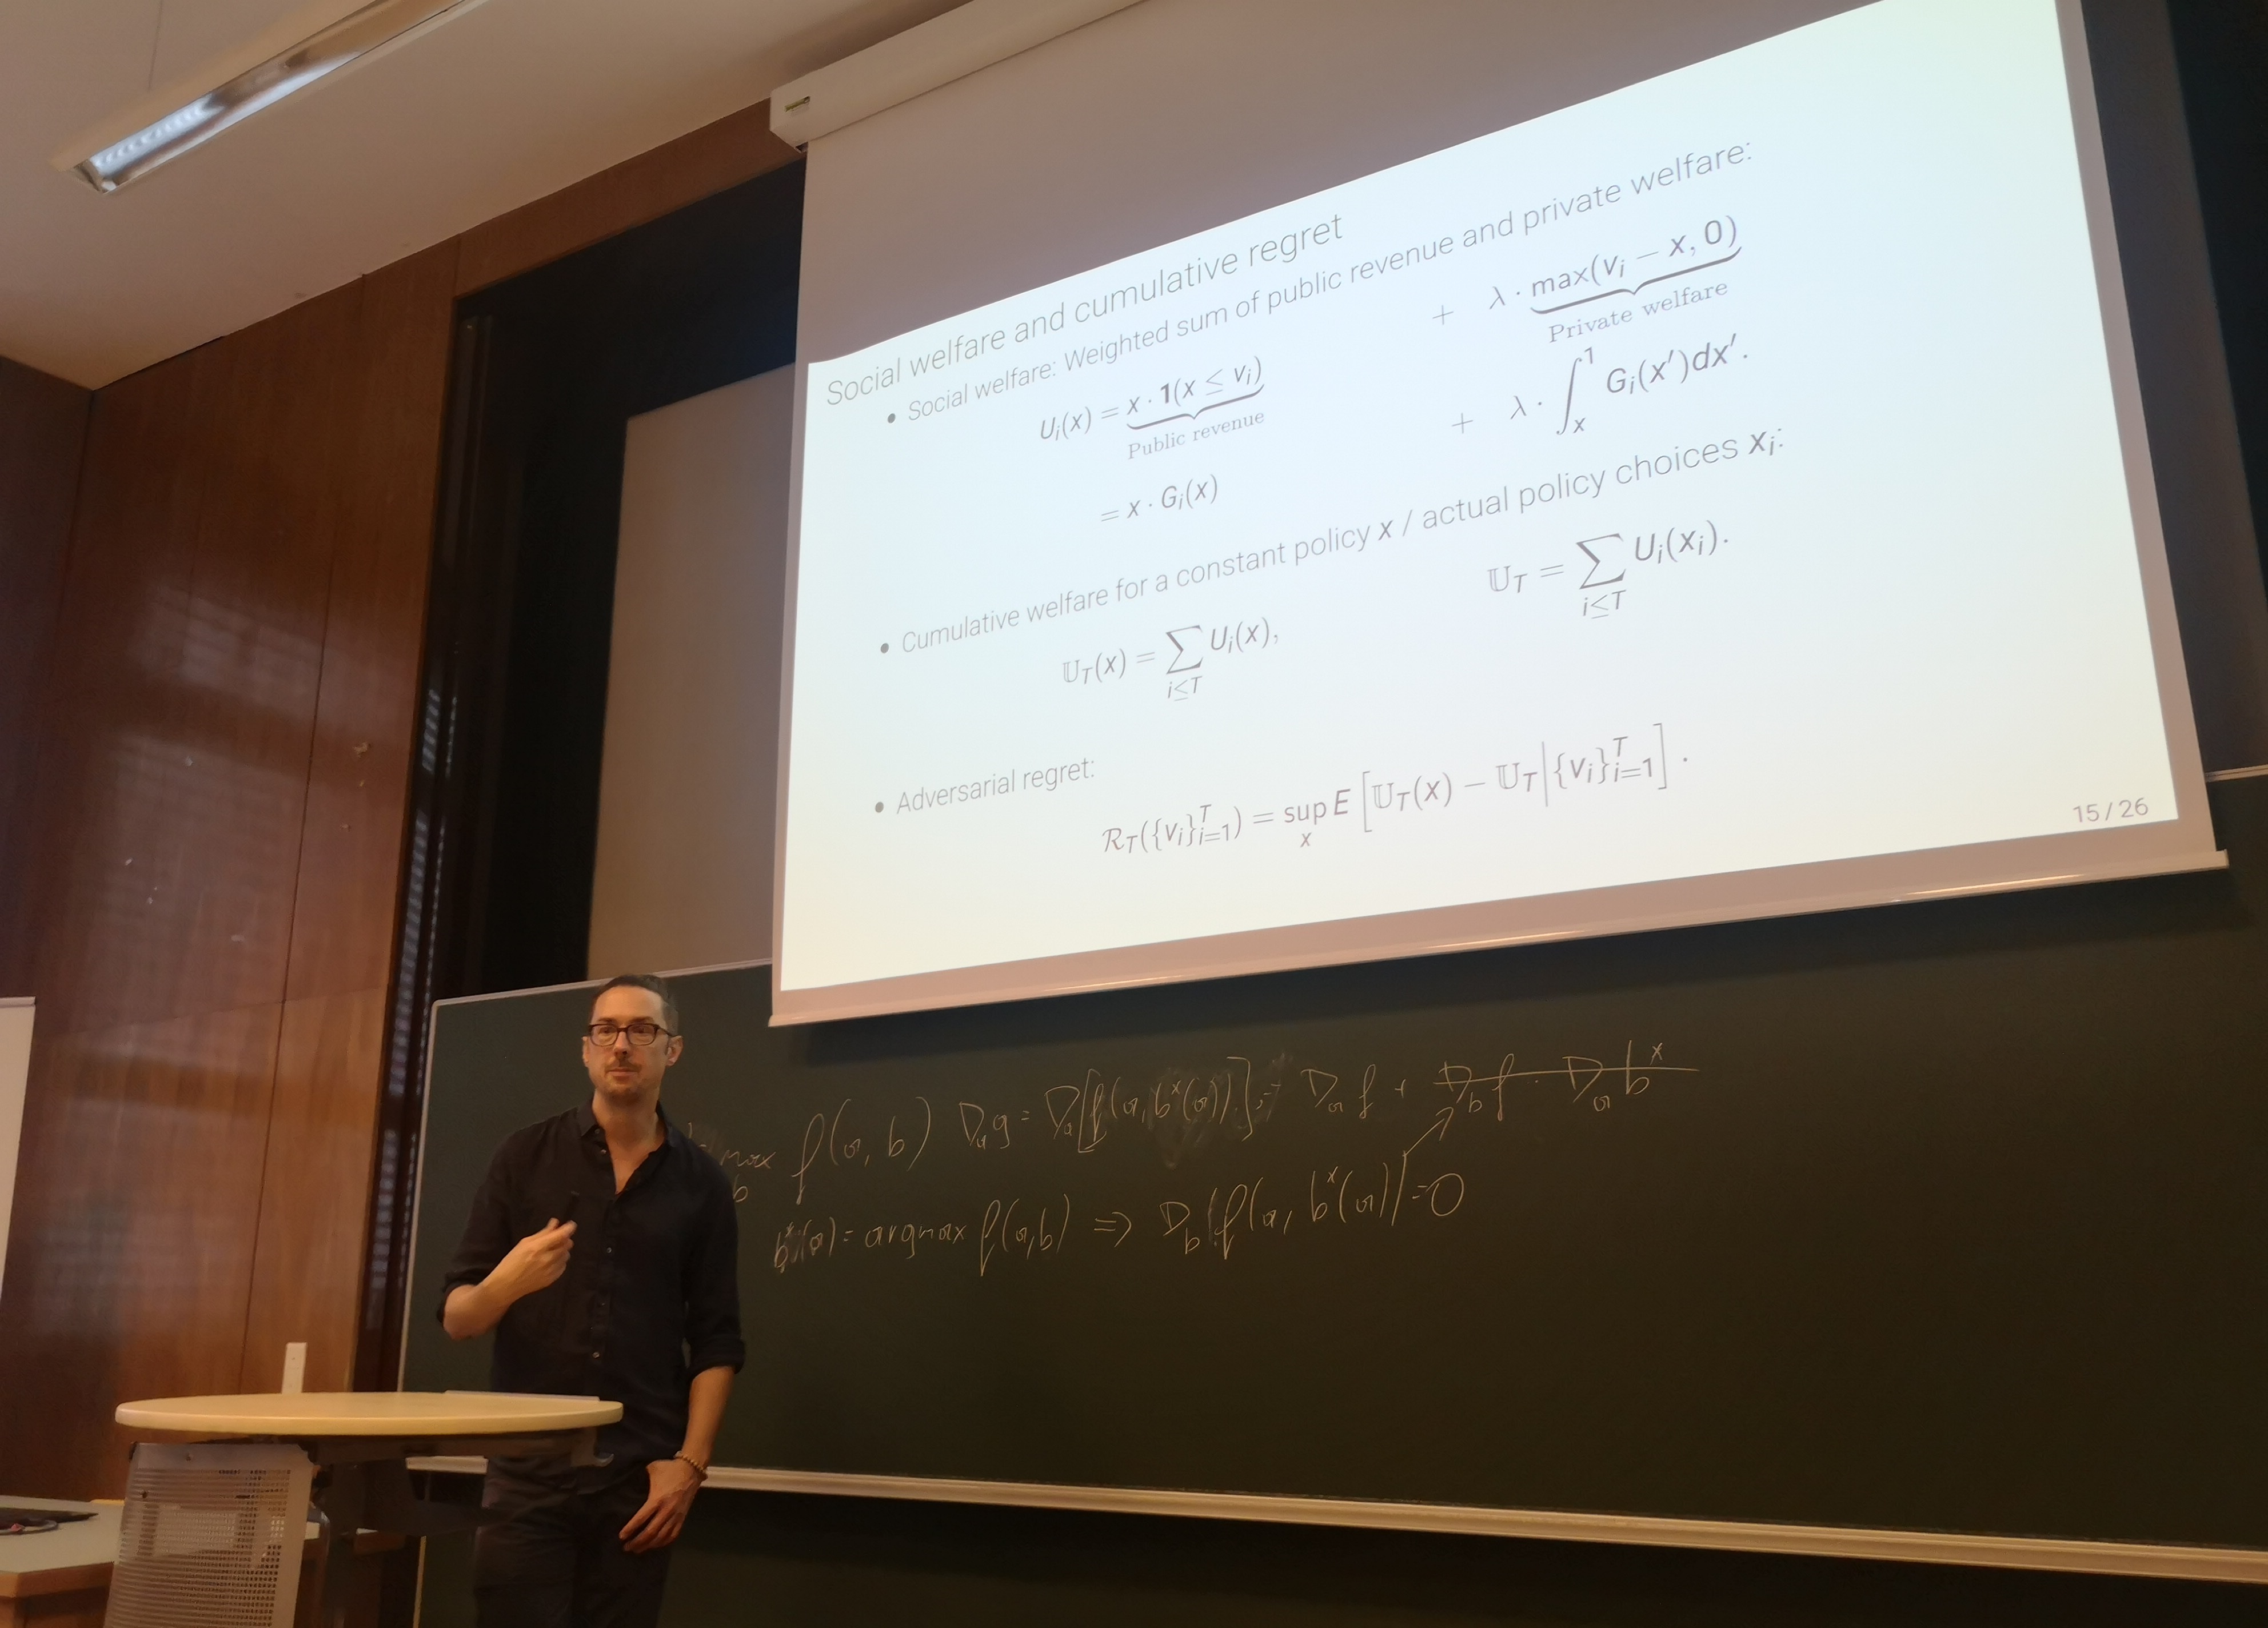 Max Kasy: “Economics and Machine Learning: What can they teach each other?”